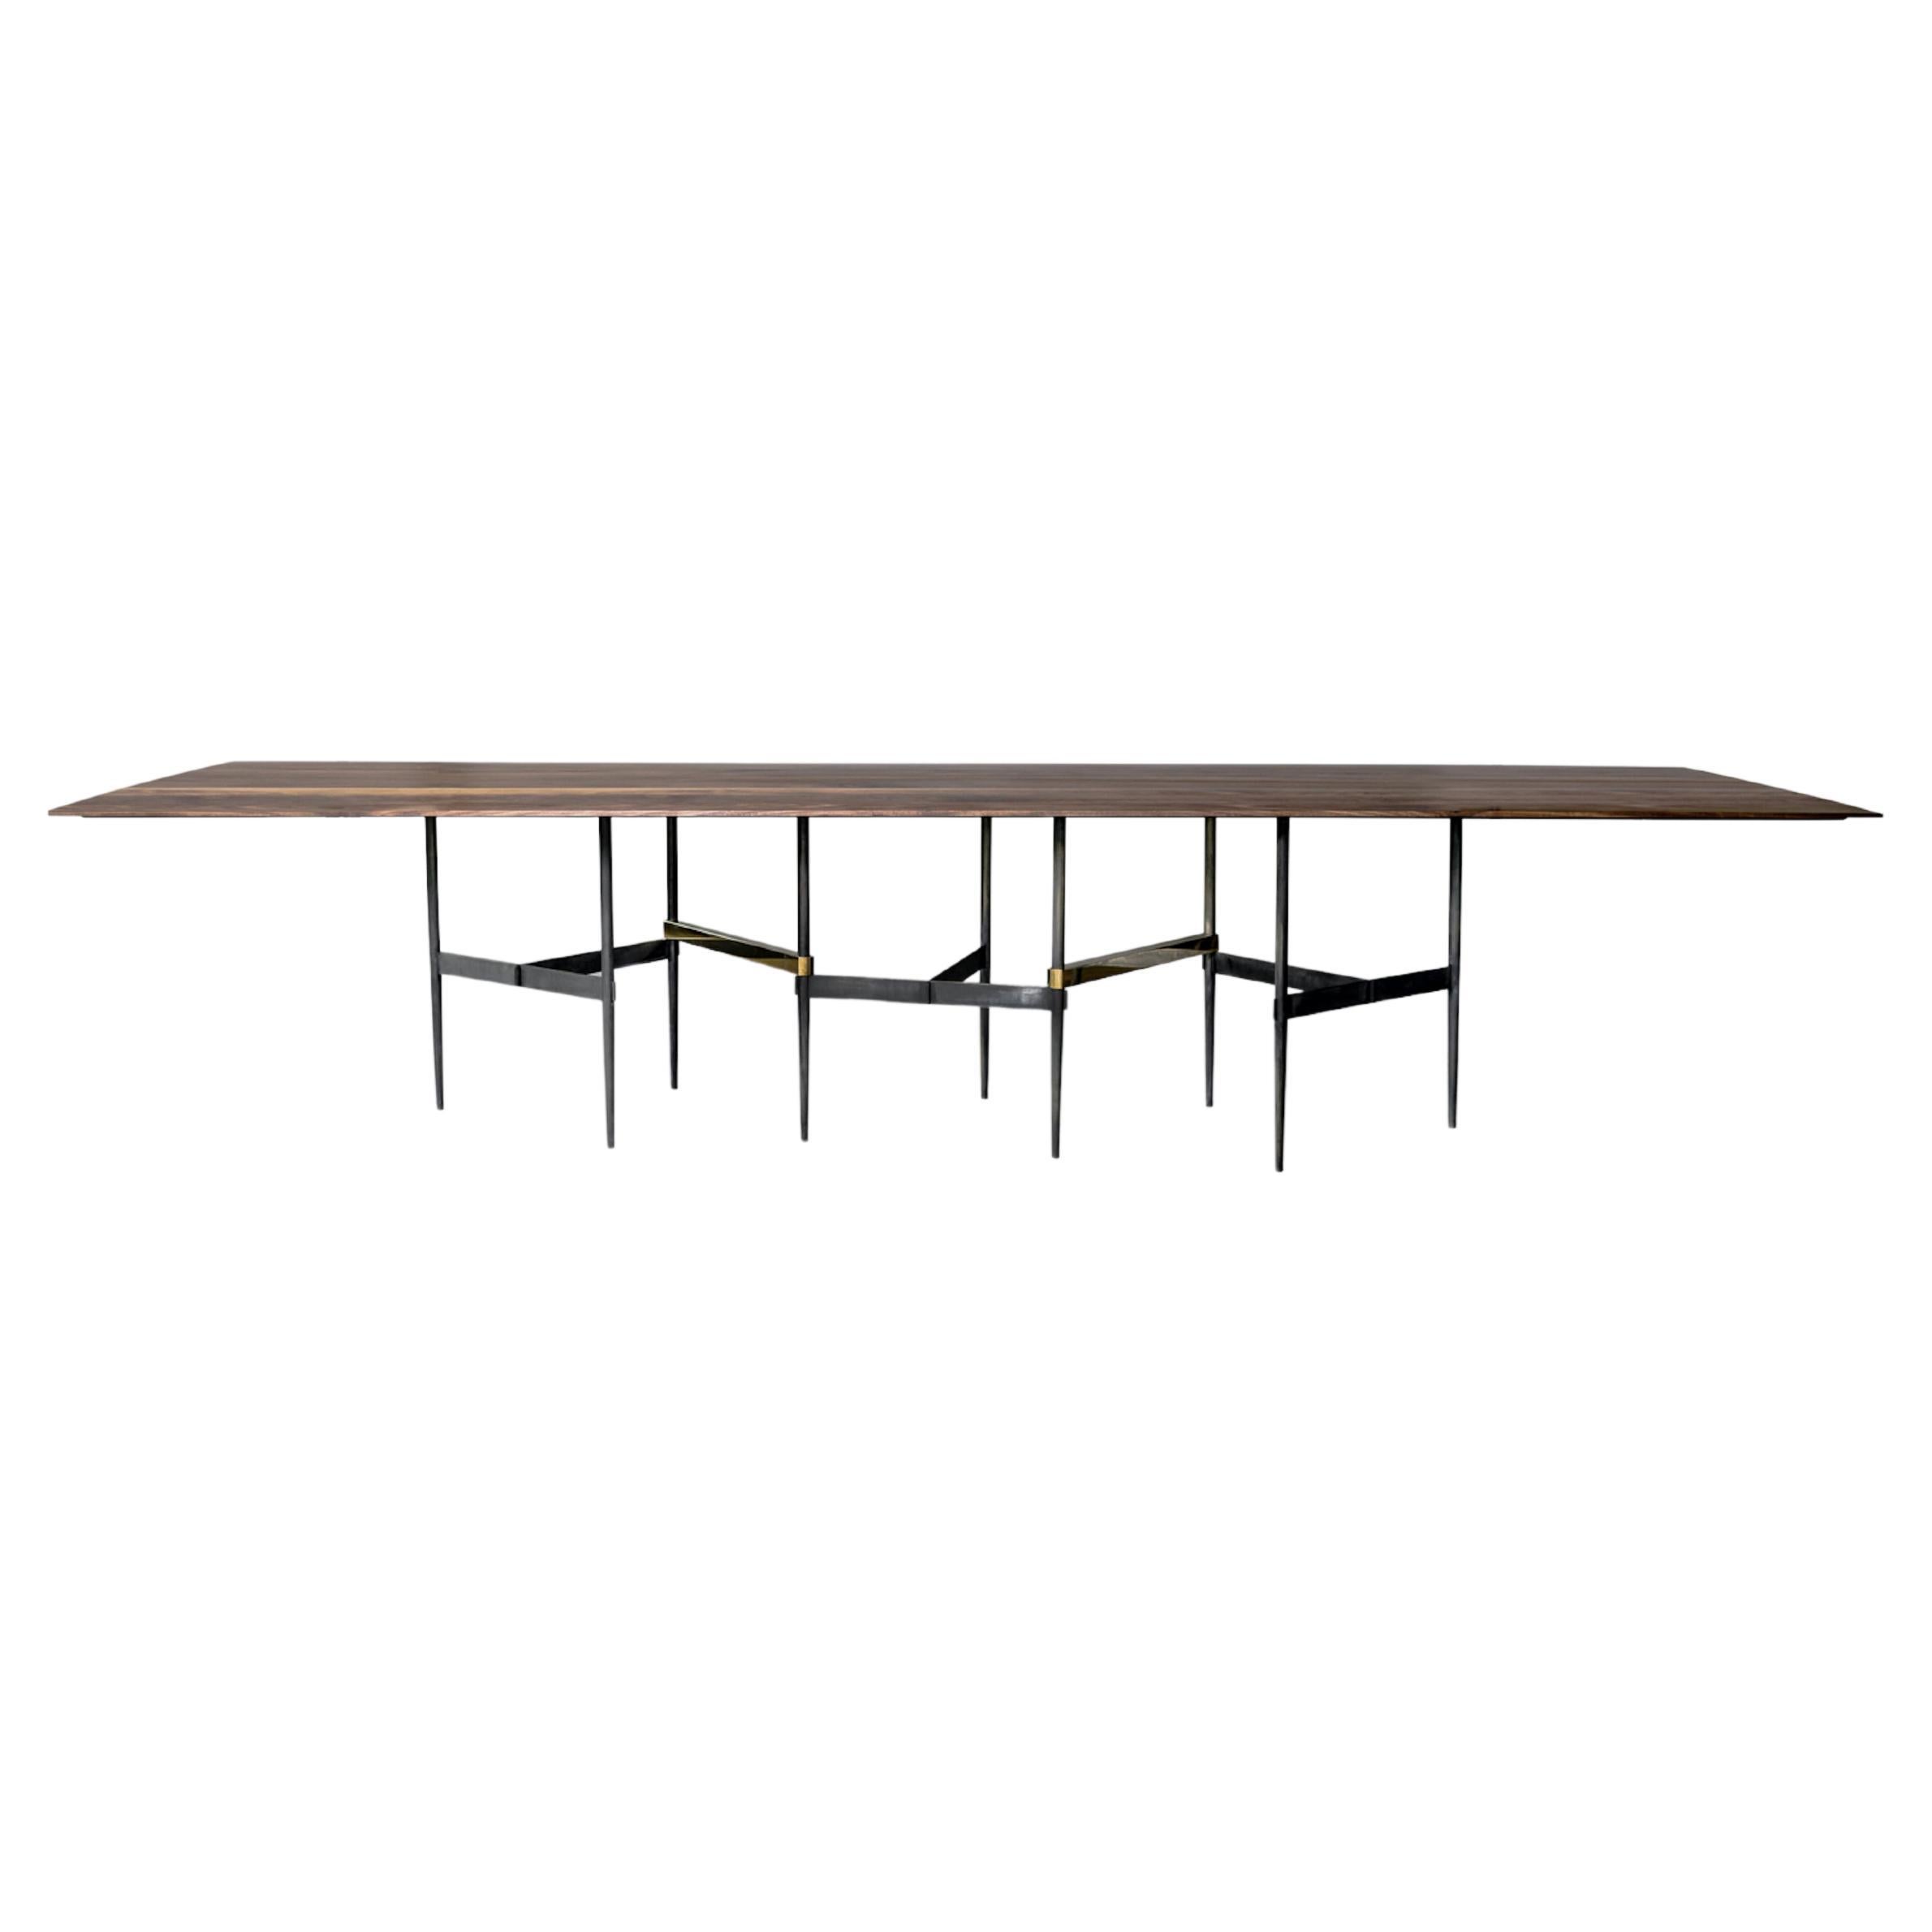 Zigzag Walnut Dining Table by Atra For Sale